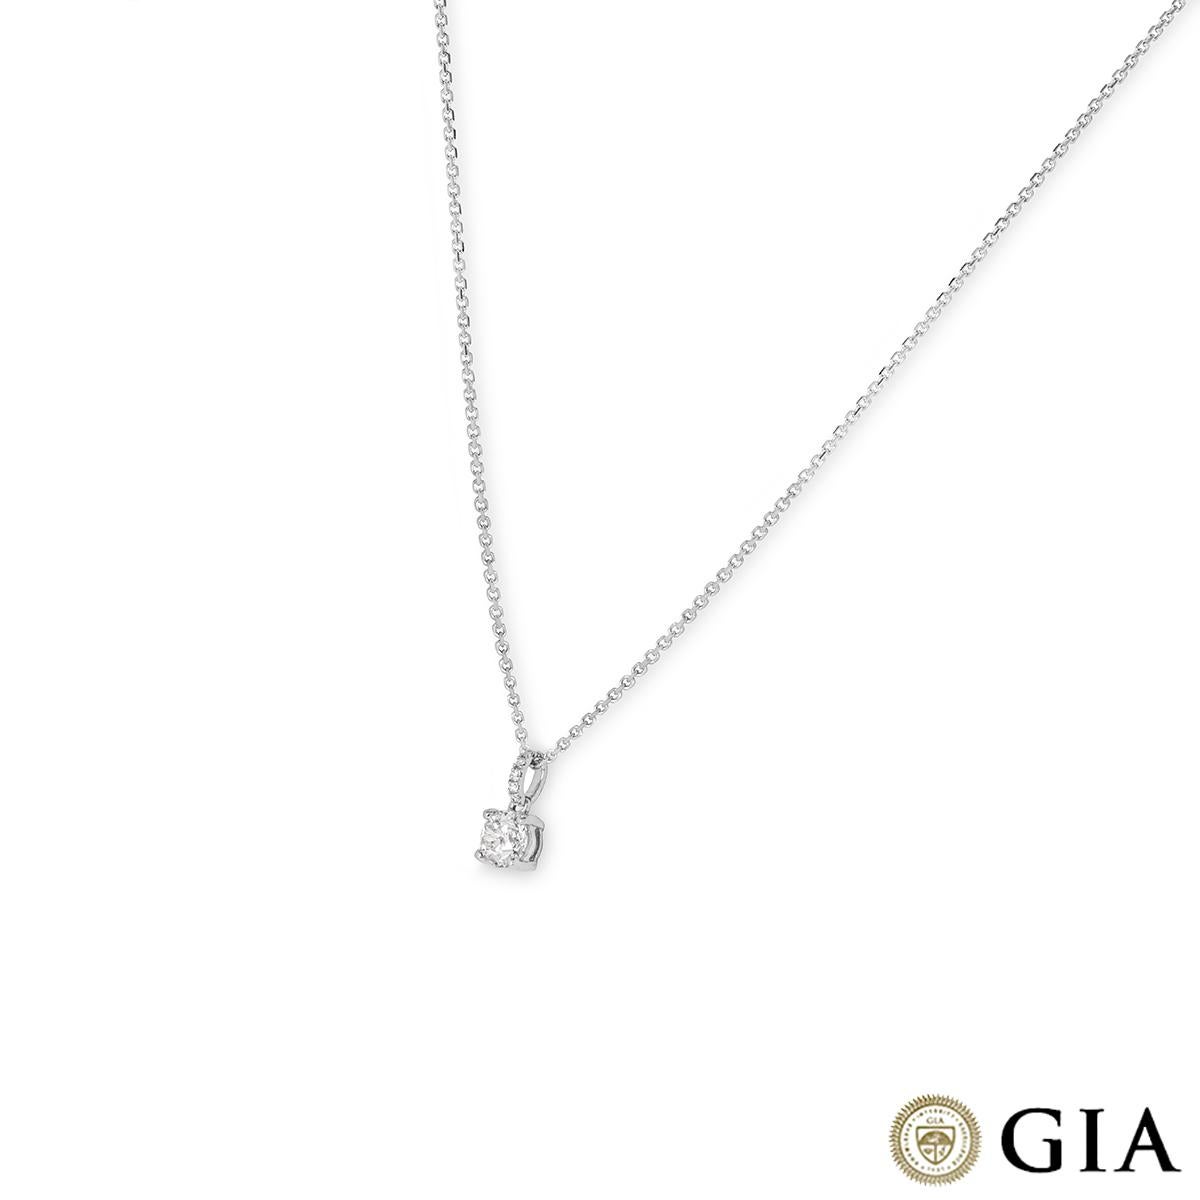 A stunning 18k white gold diamond pendant. The pendant features a round brilliant cut diamond set in a four prong mount weighing 0.70ct, I colour and VS2 clarity. Further accentuating the centre diamond are 5 round brilliant cut diamonds pave set to